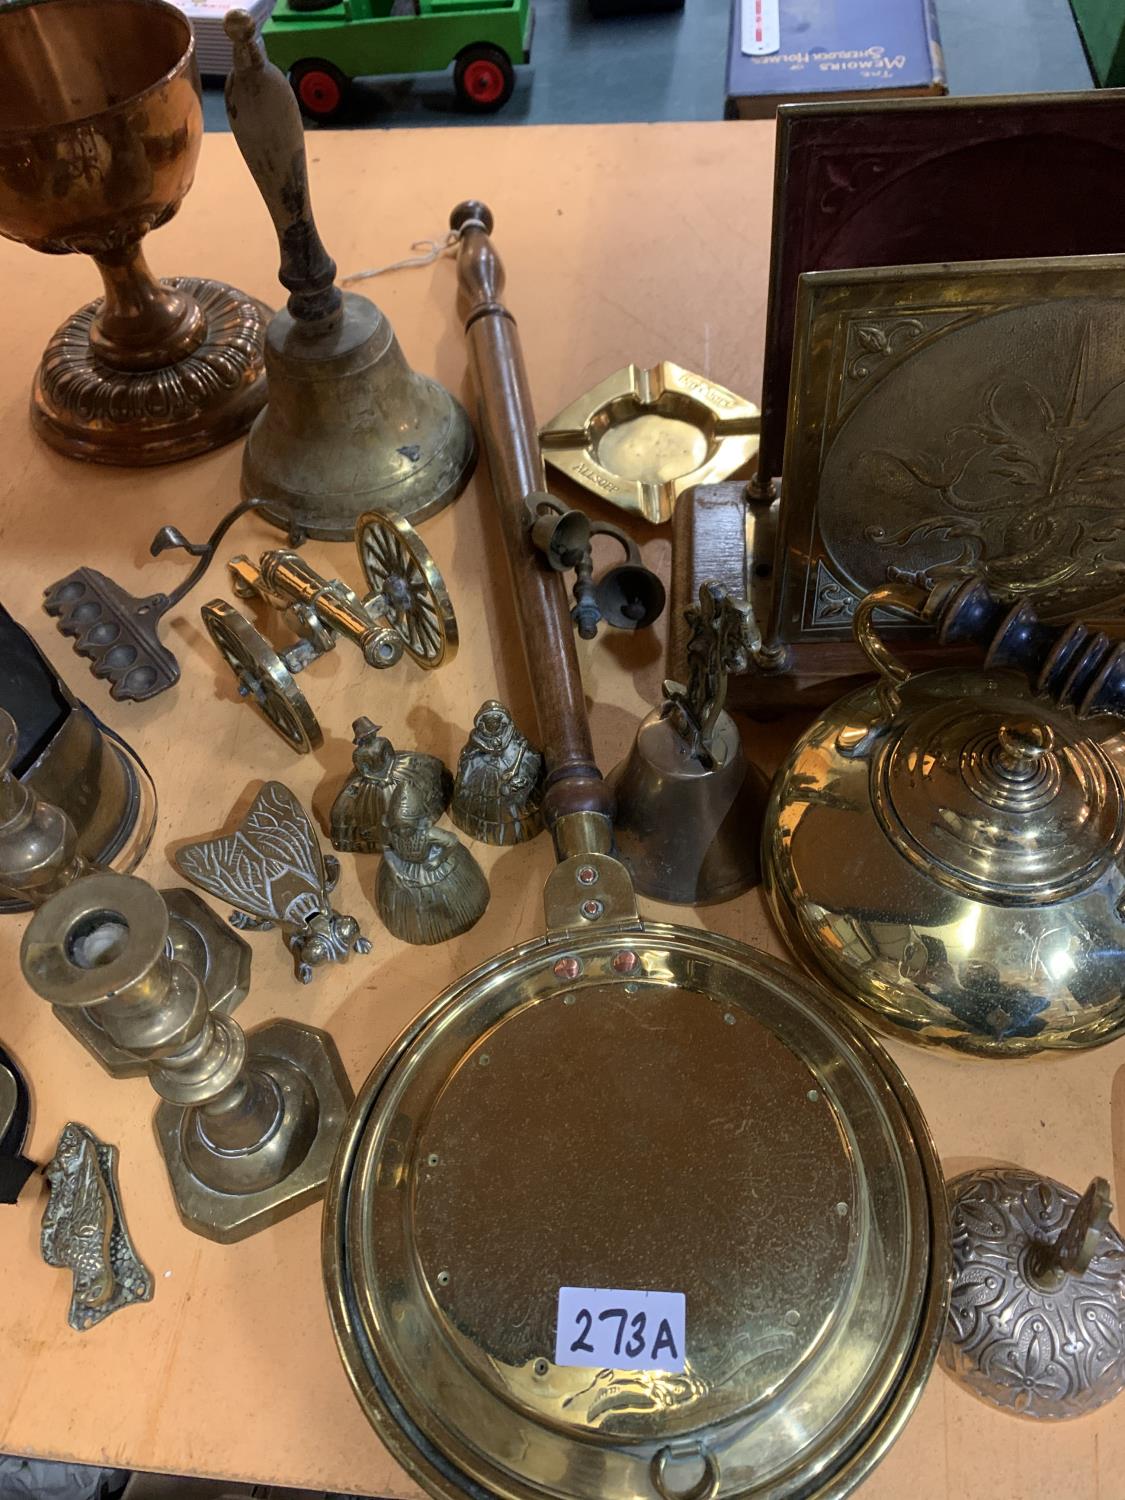 A LARGE QUANTITY OF BRASSWARE TO INCLUDE A BELL, HORSE BRASSES, KETTLE, CANDLESTICKS, CANNON, LAMP - Image 8 of 12